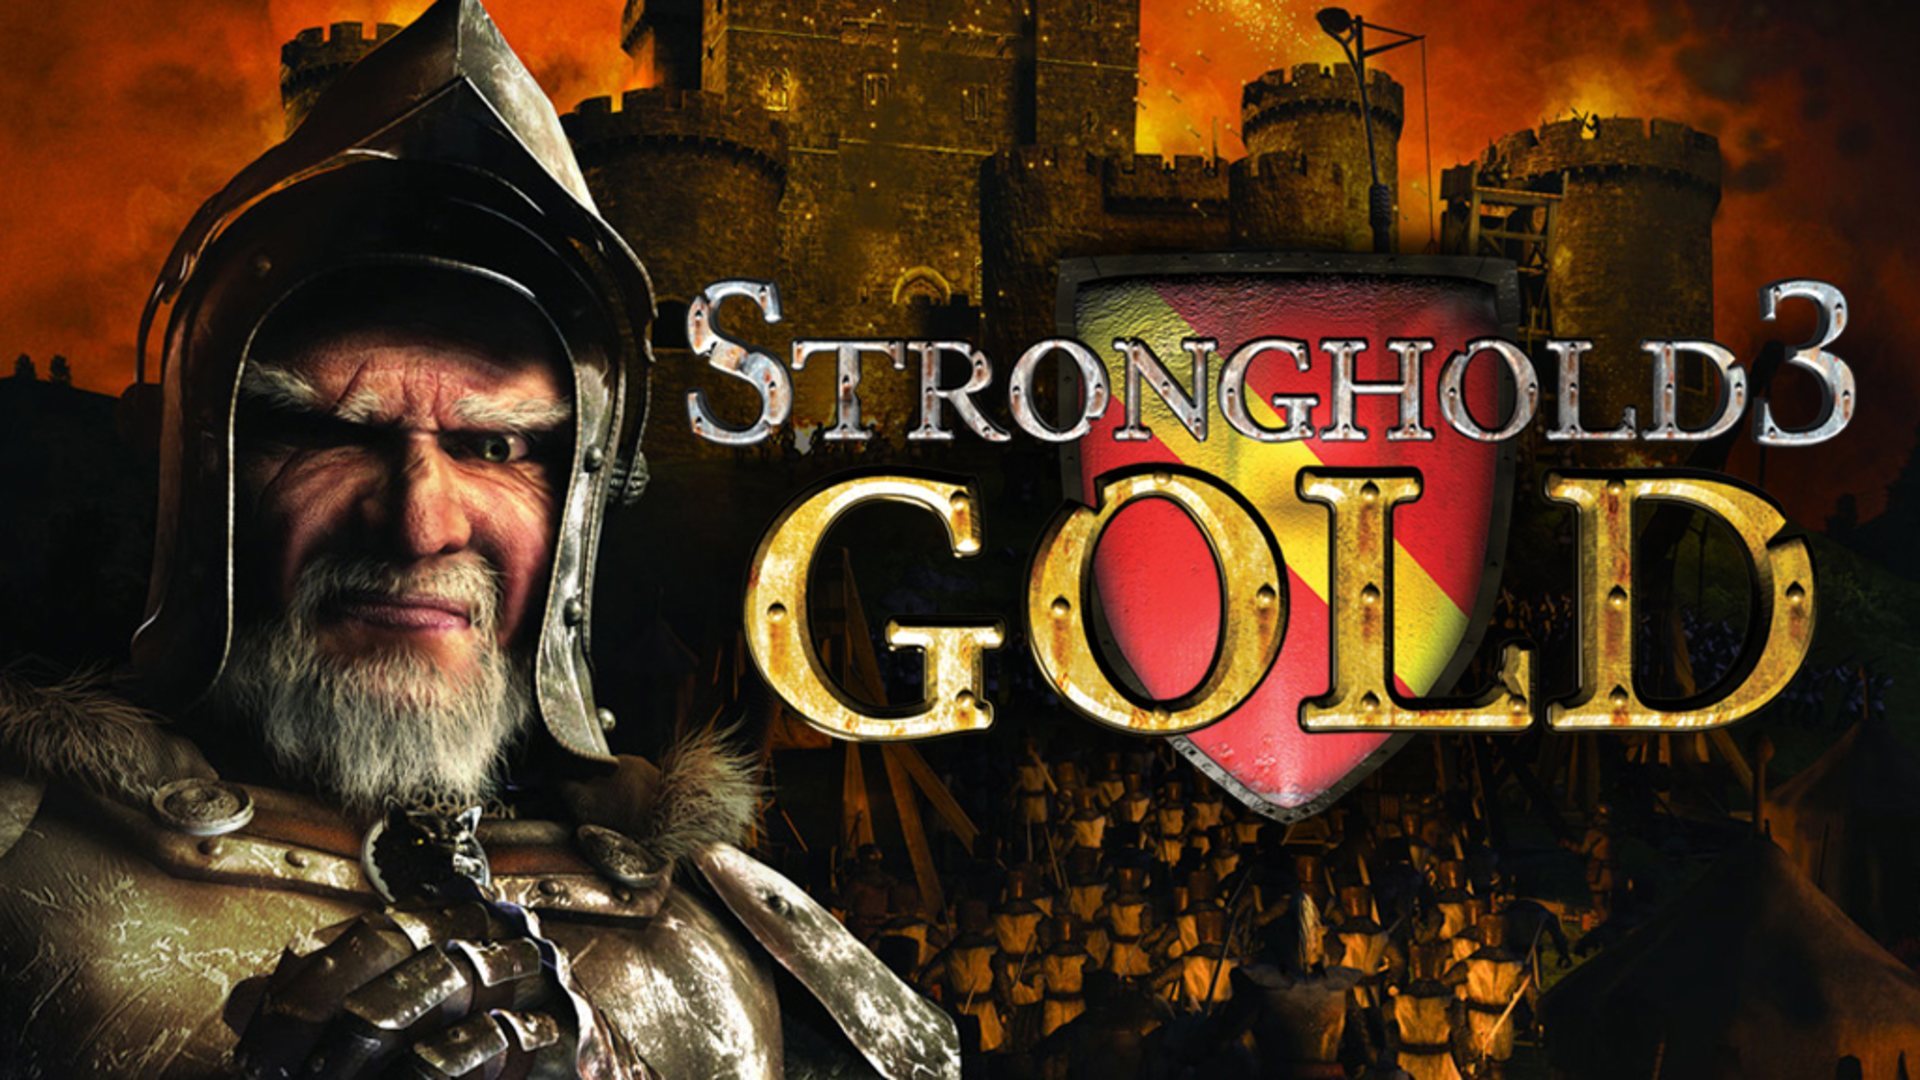 stronghold 3 steam